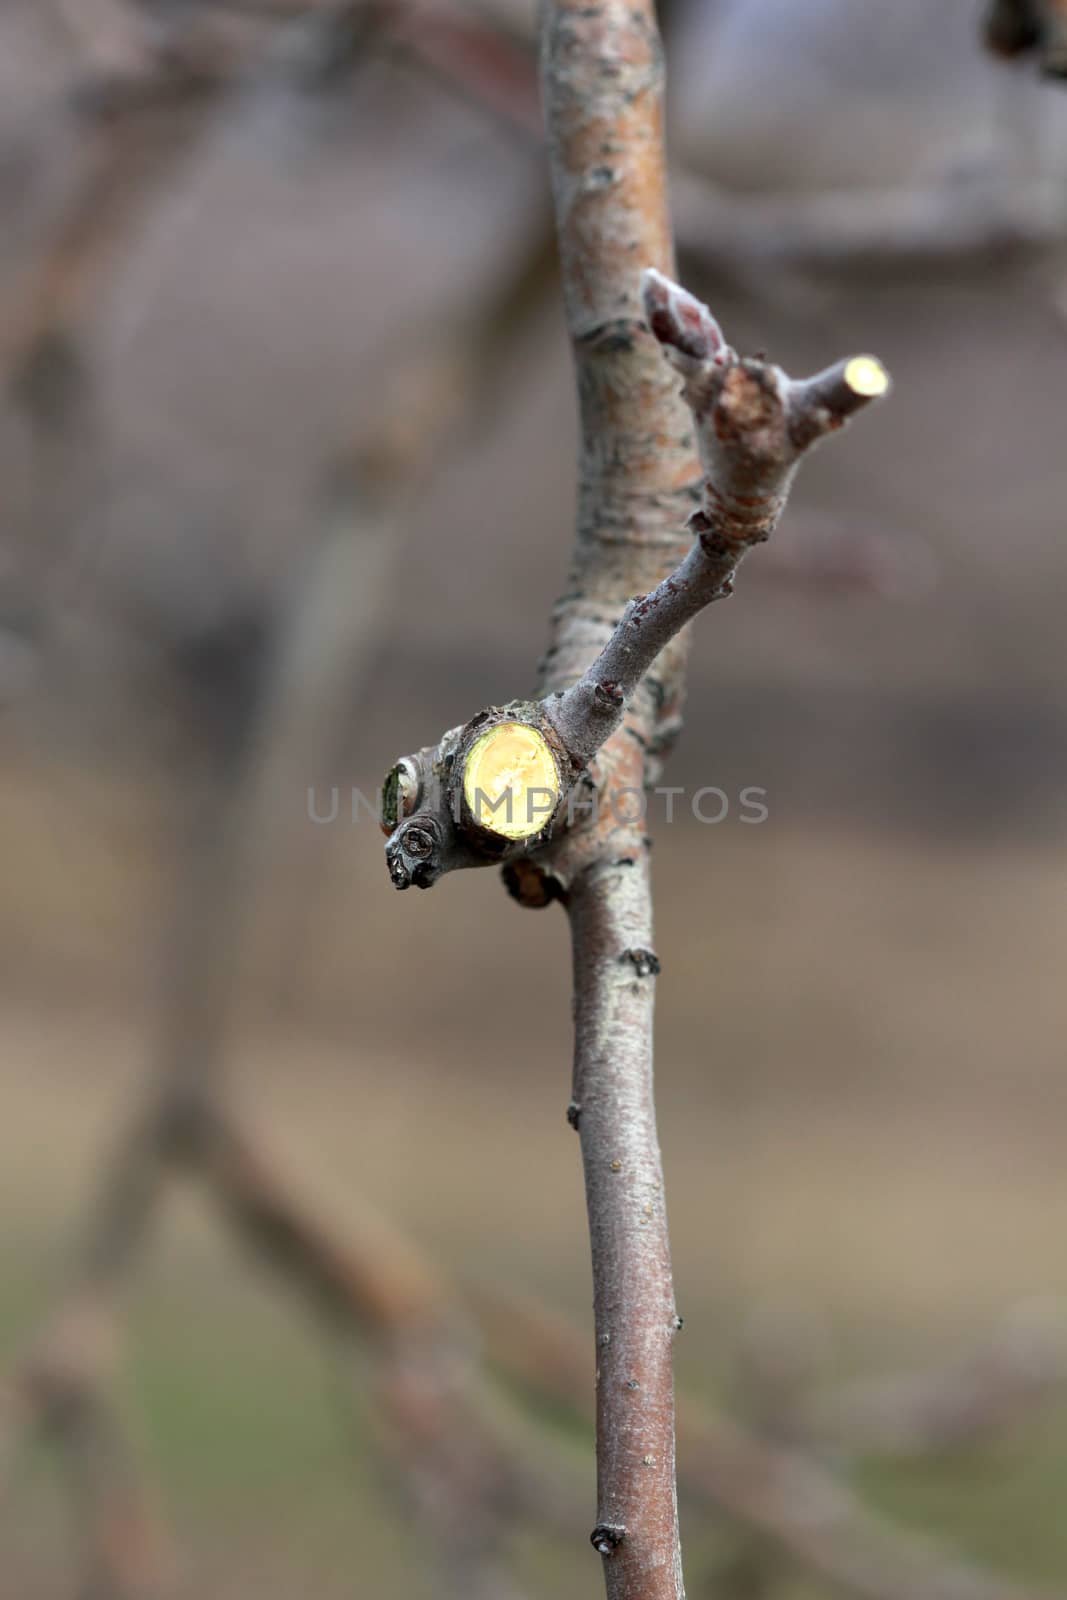 image of a Pruned apple twig and bud in march